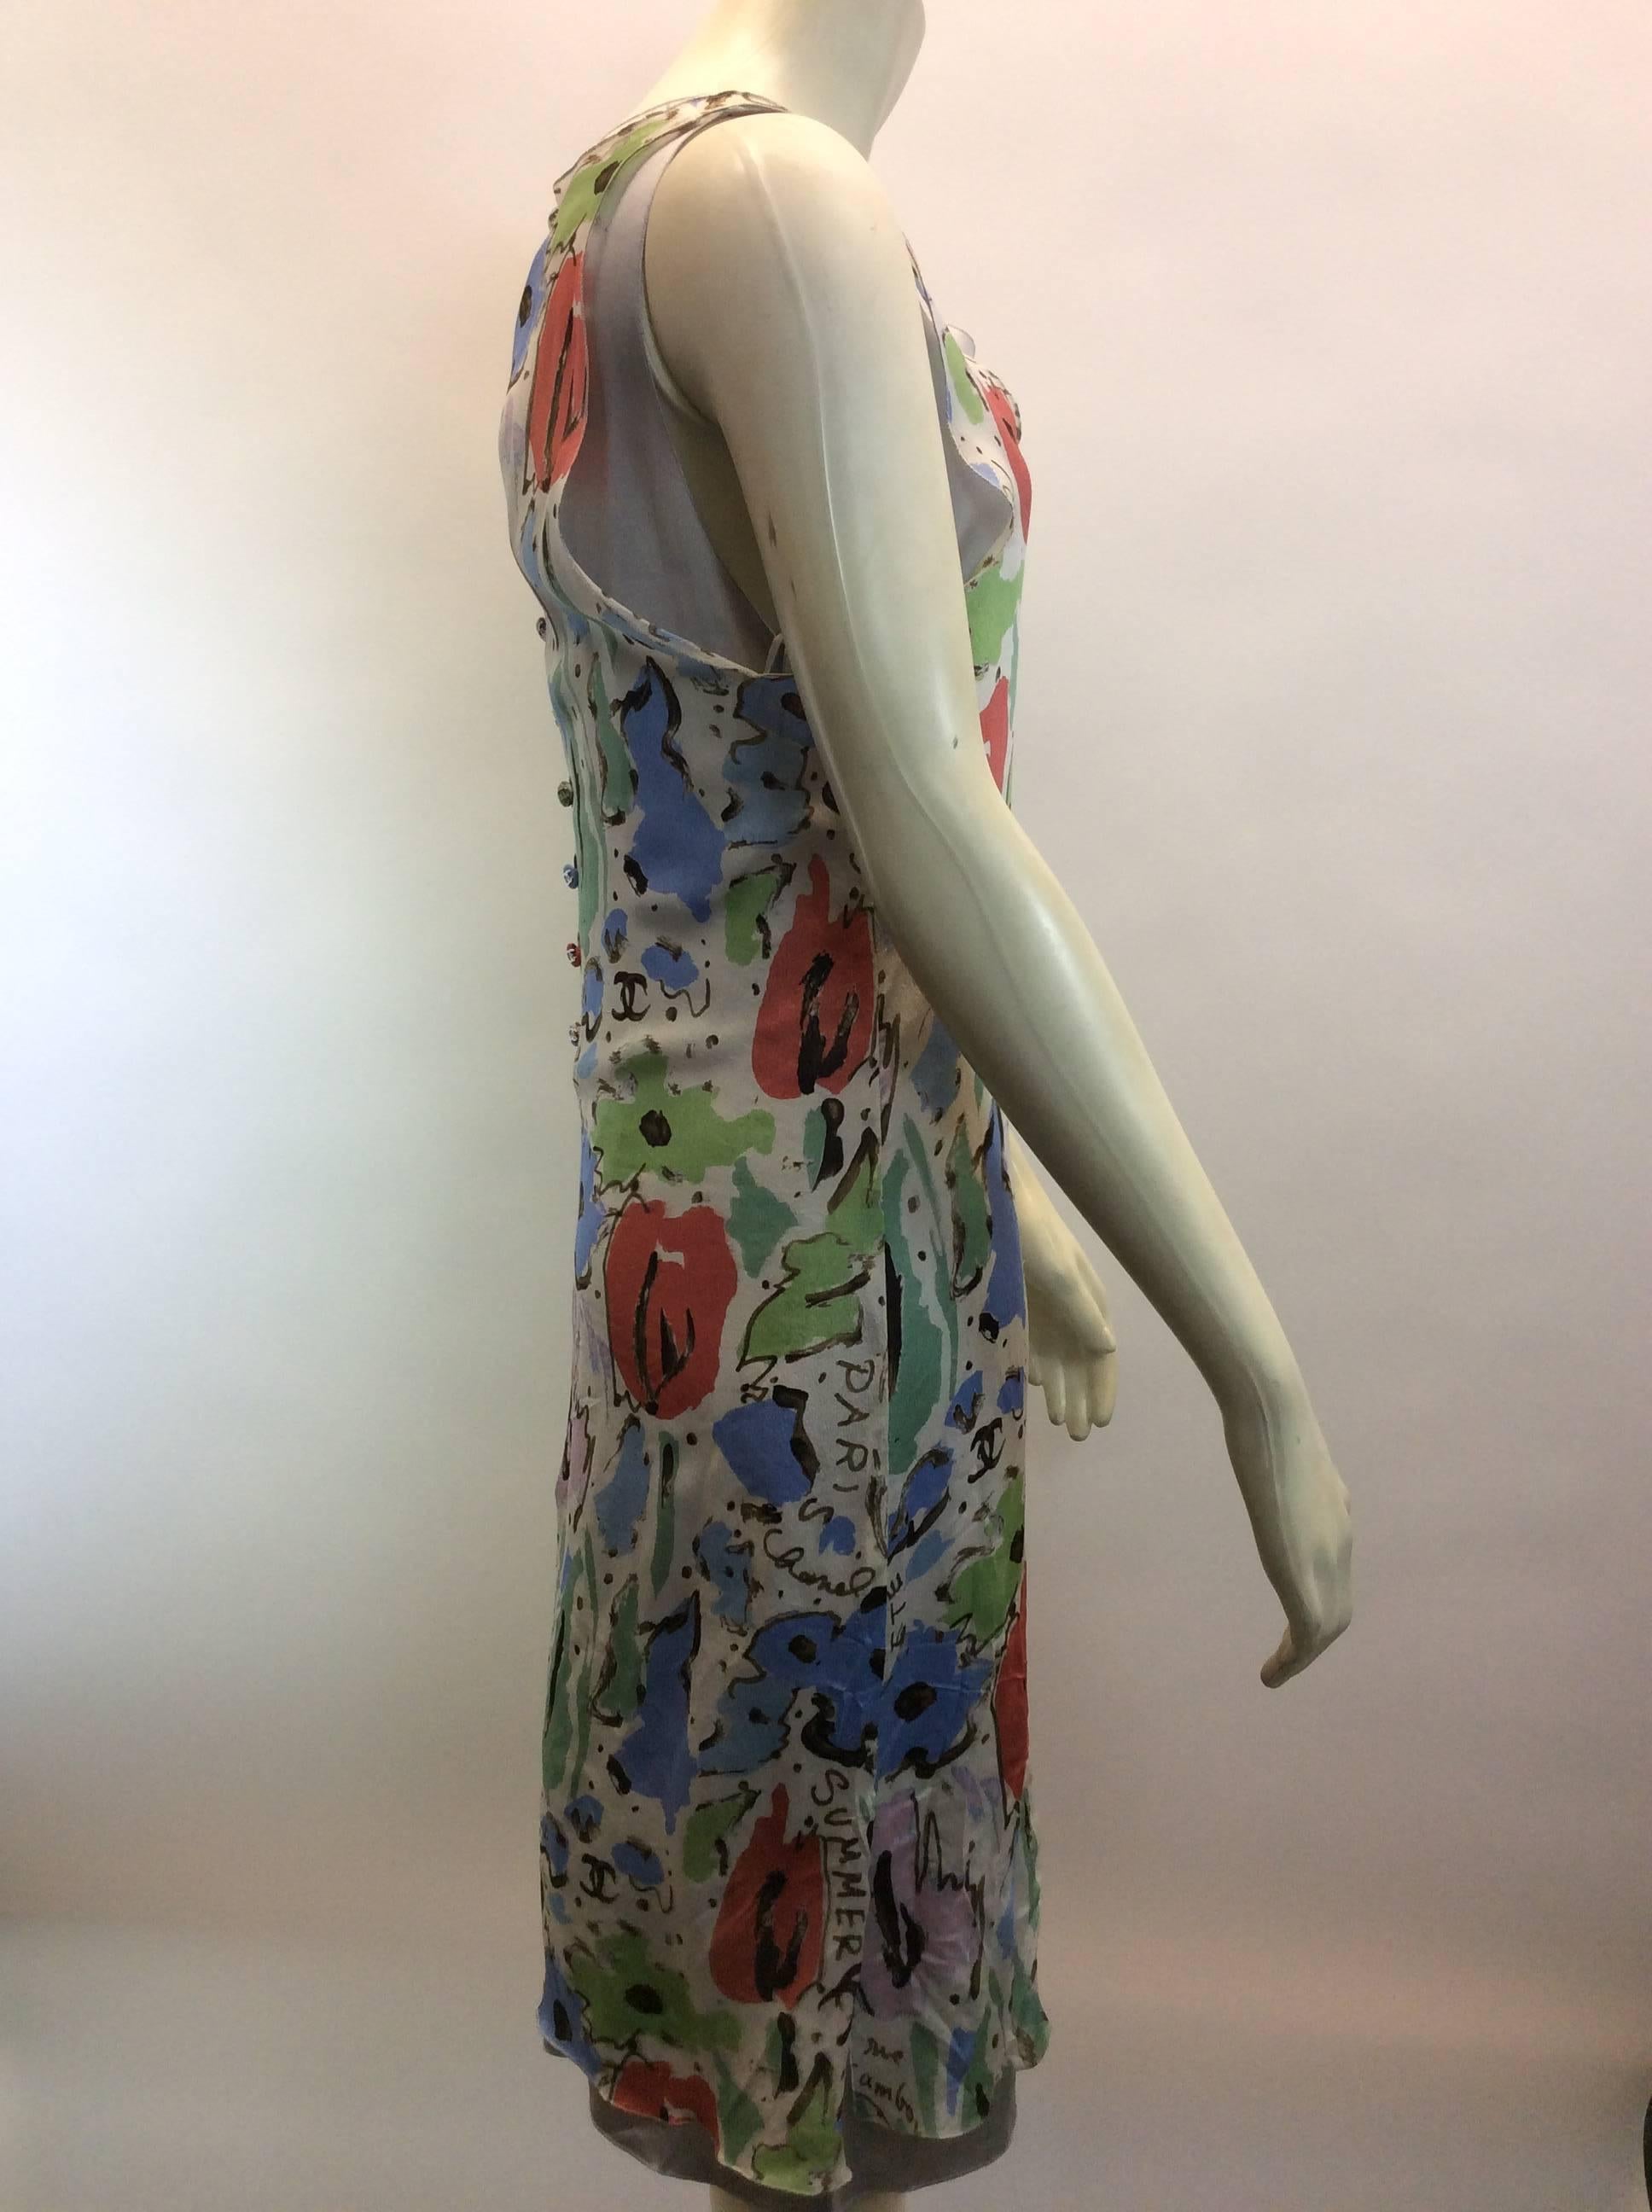 Chanel Multi-color Print Silk Dress In Excellent Condition For Sale In Narberth, PA